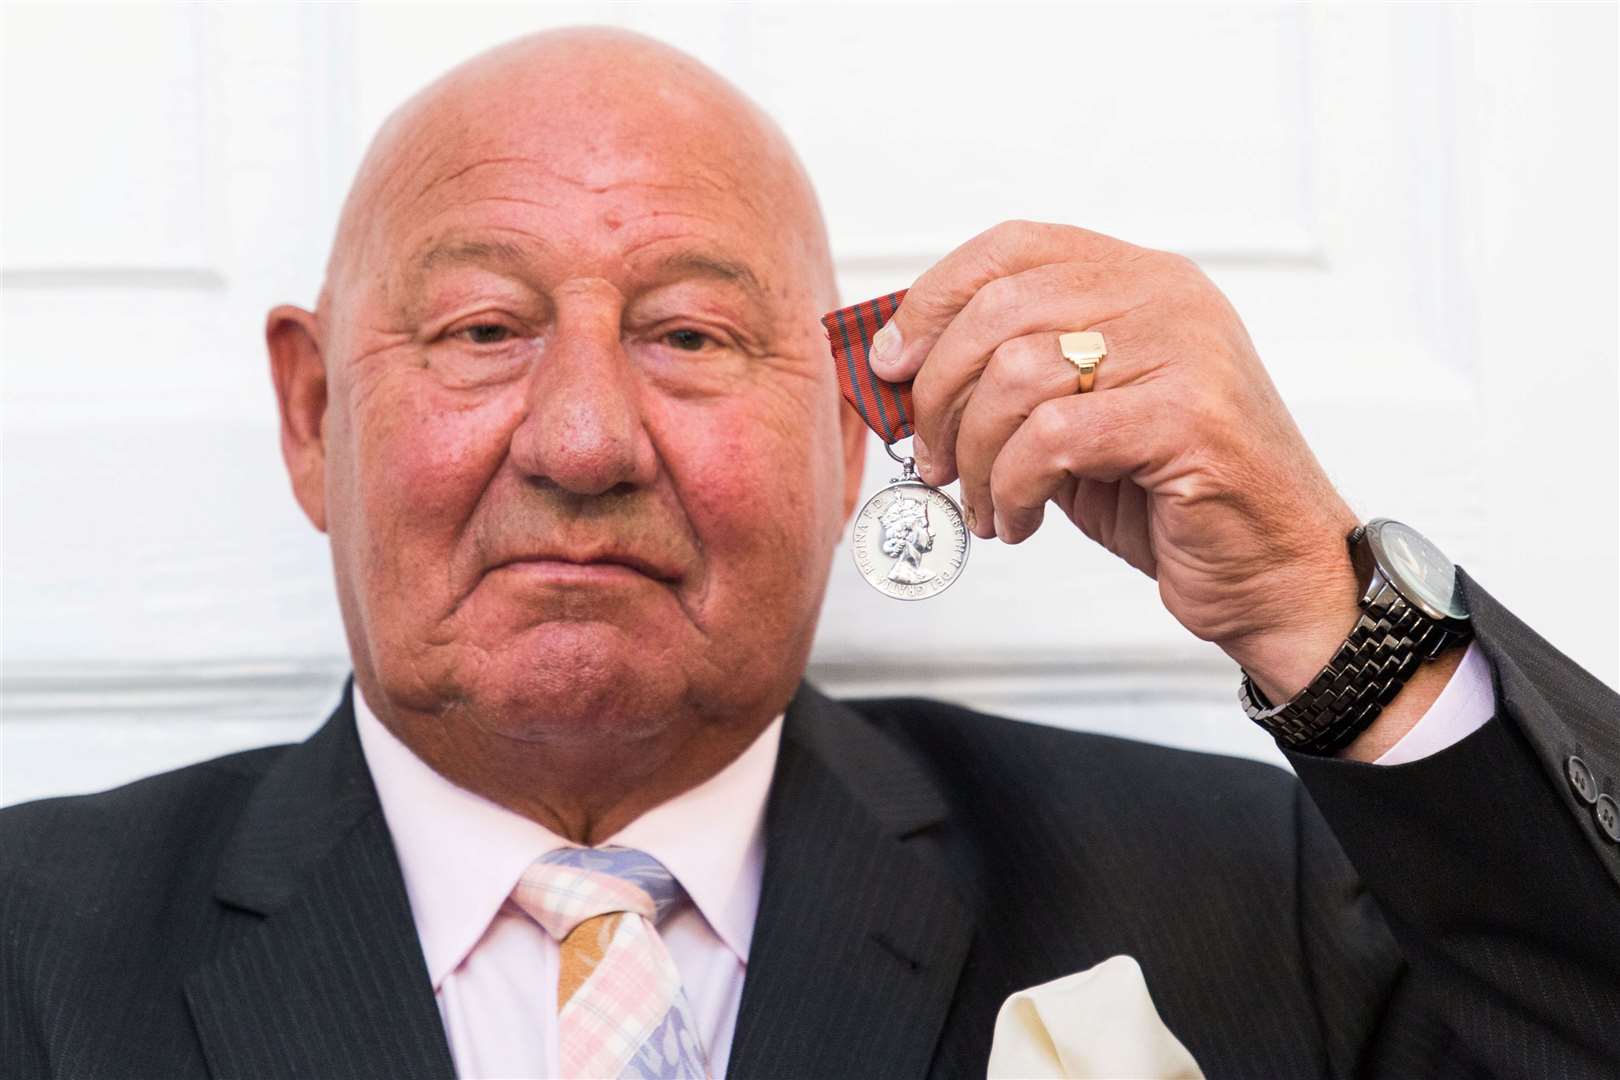 Ronnie Russell with his George Medal at Dix Noonan Webb, London. Picture: SWNS